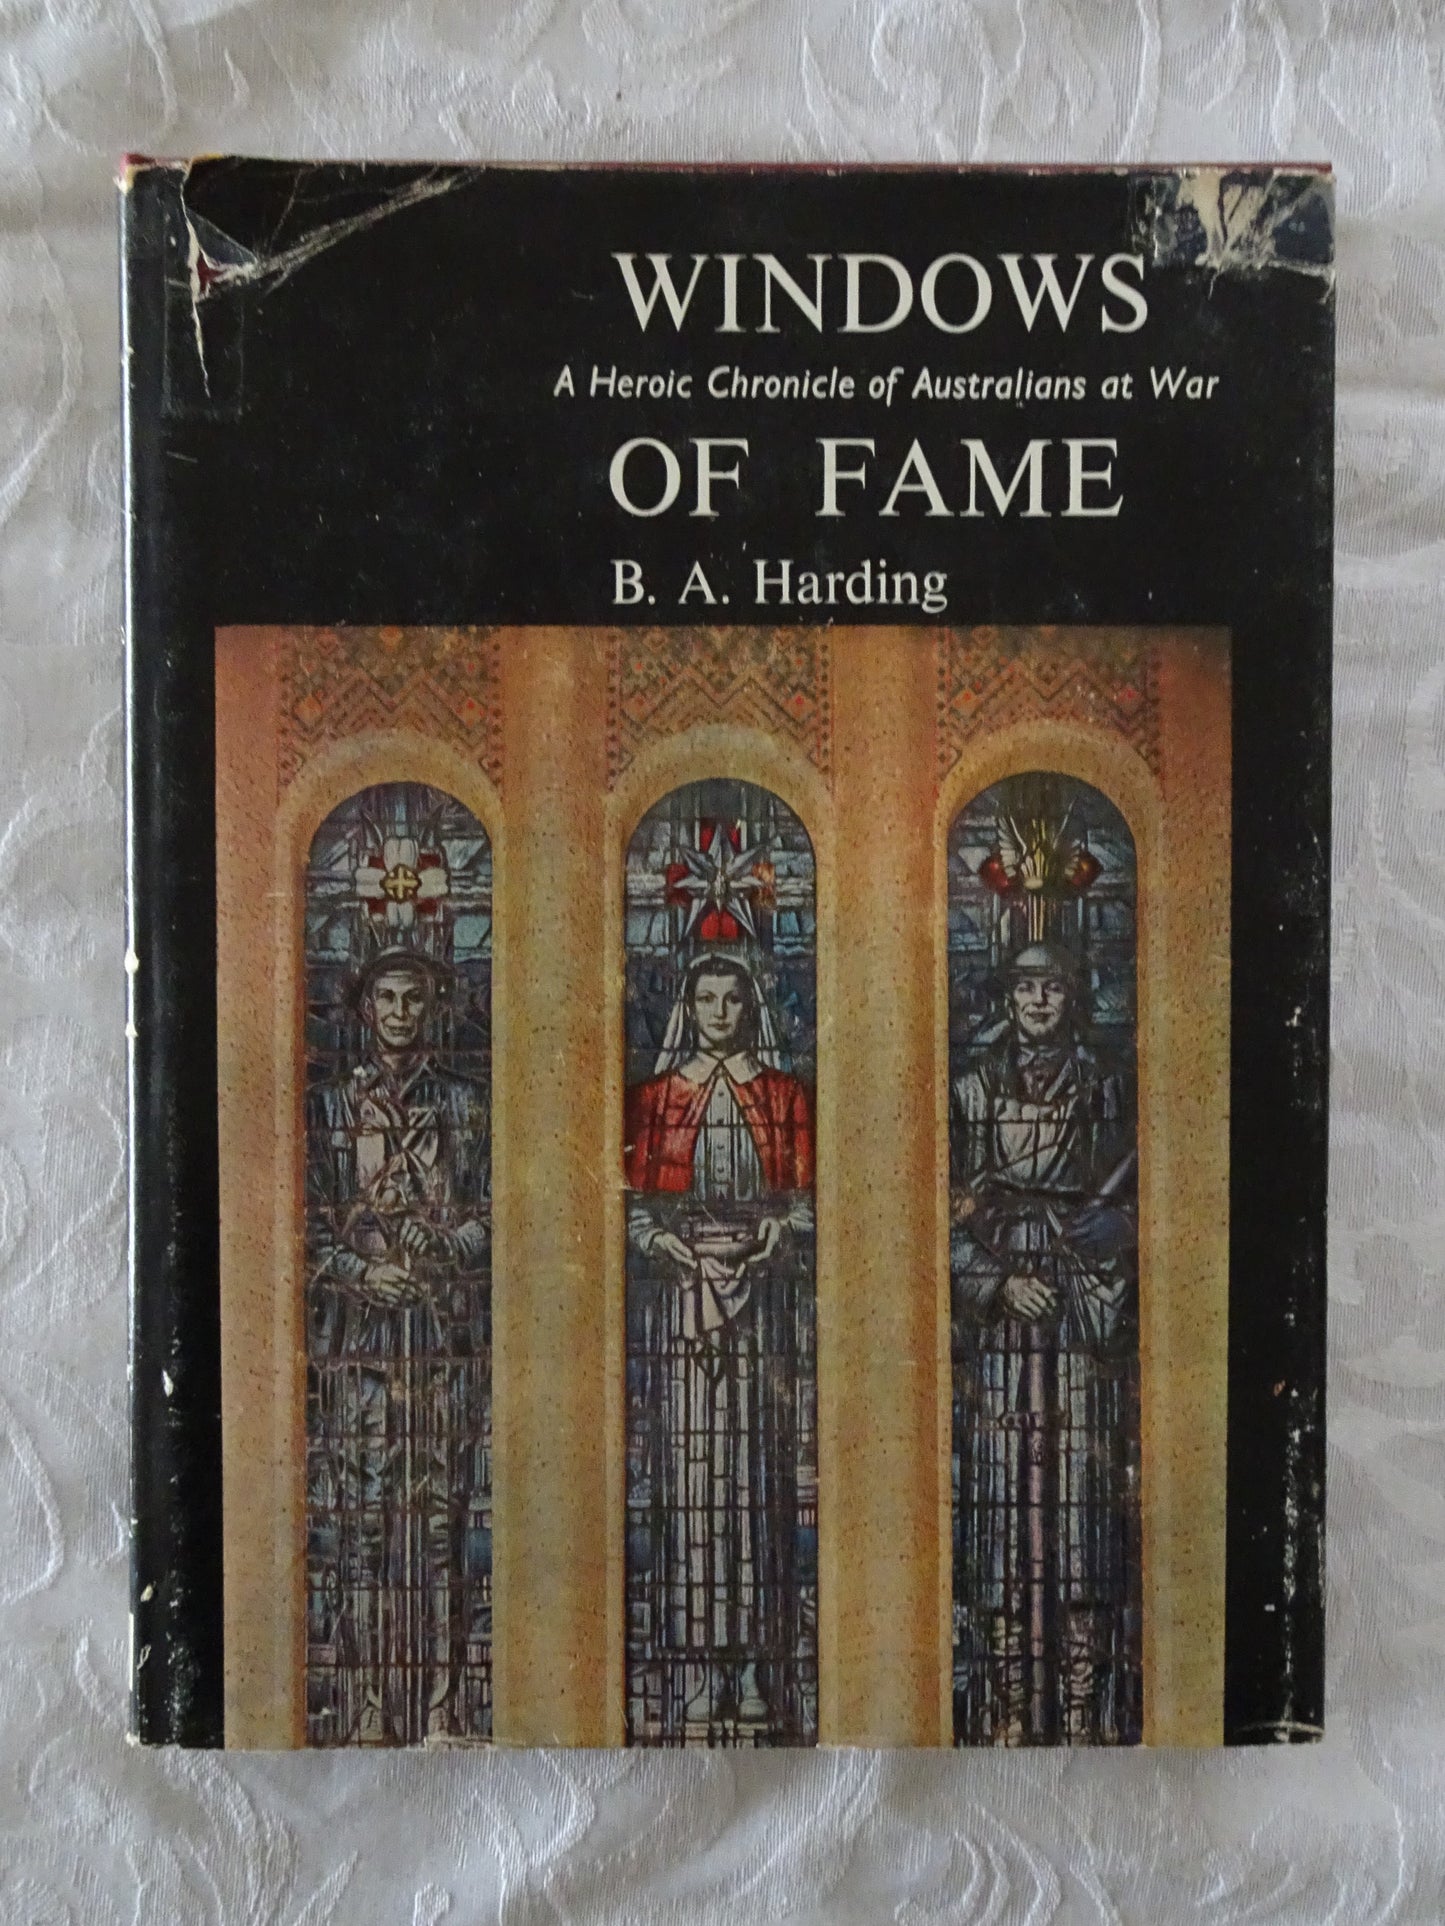 Windows of Fame  A Heroic Chronicle of Australians at War  by B. A. Harding